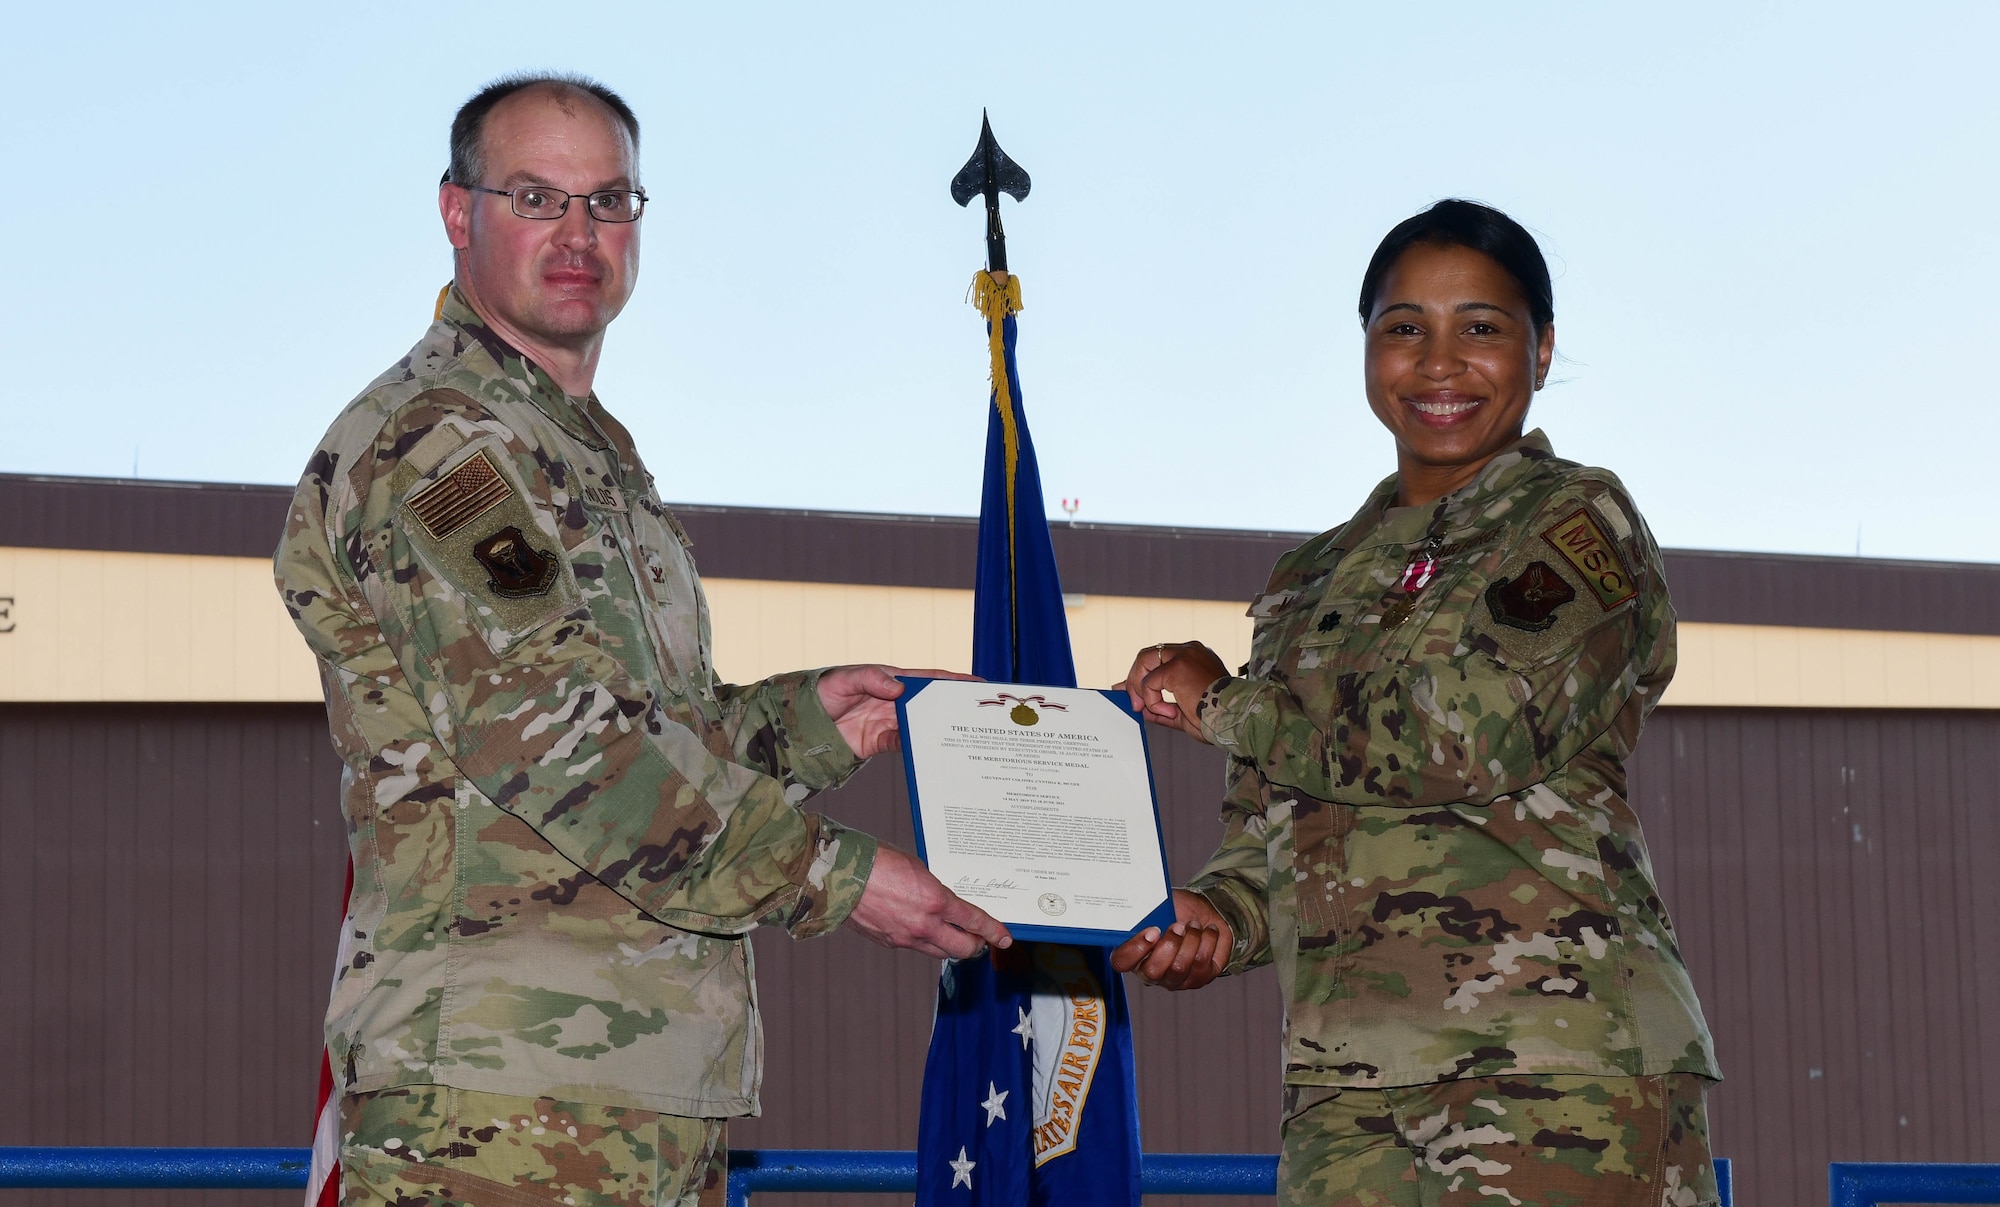 During the ceremony, Col. Mark Reynolds, 509th Medical Group commander, passed the unit flag to Lt. Col. Jessica Dees as a symbol of the continuity of authority between the outgoing and incoming commanders. (U.S. Air Force photo by Tech. Sgt. Heather Salazar)